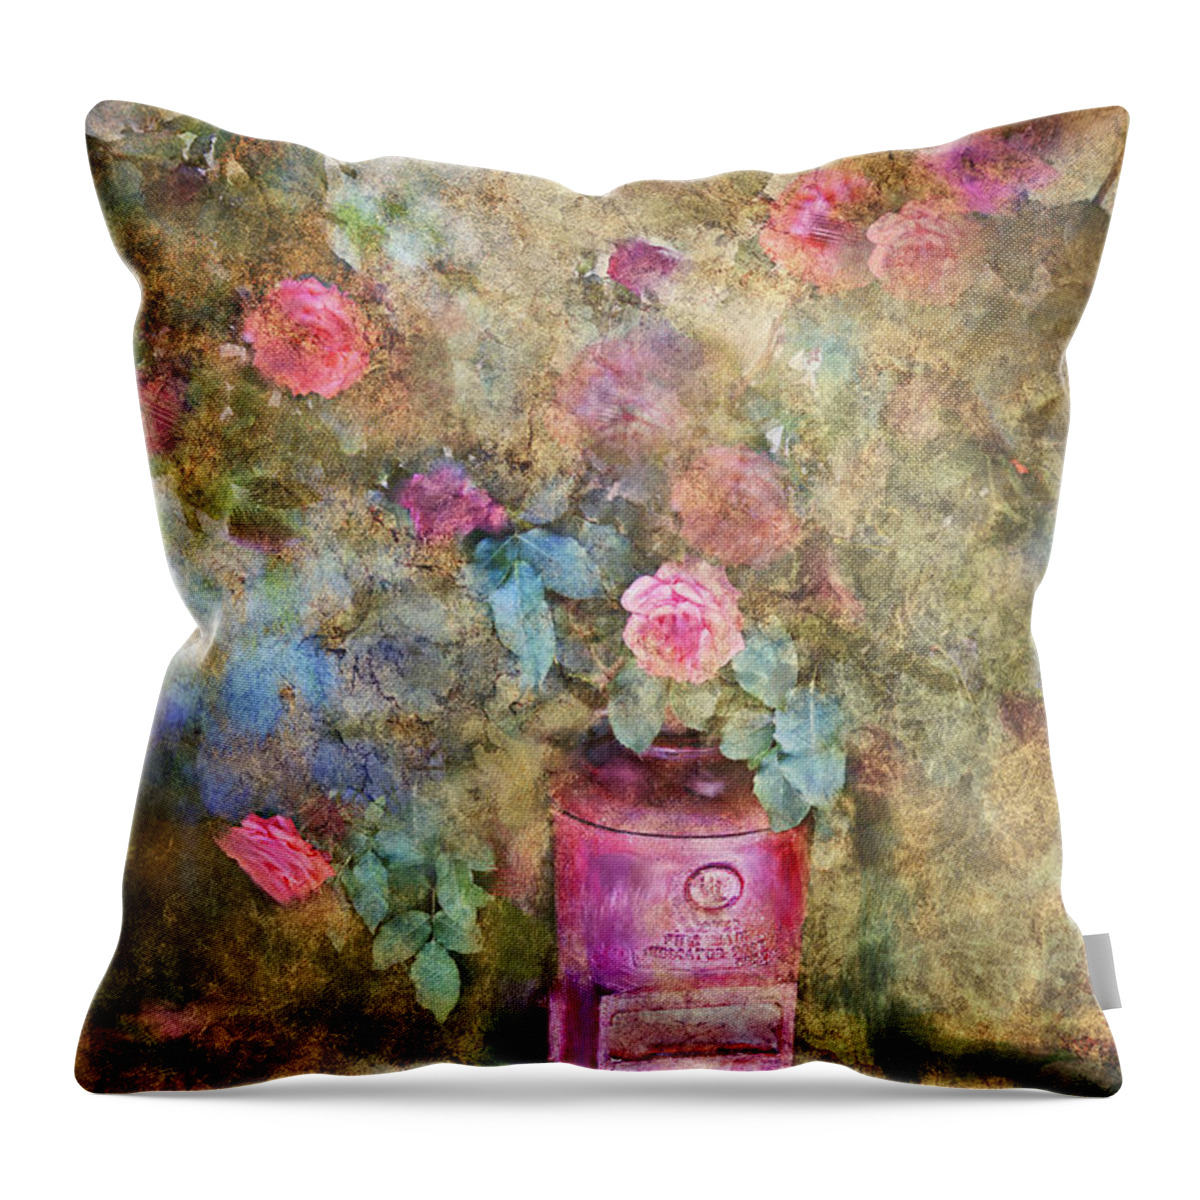 Fine Art Painting Throw Pillow featuring the digital art Pink Wild Roses by Sandra Selle Rodriguez